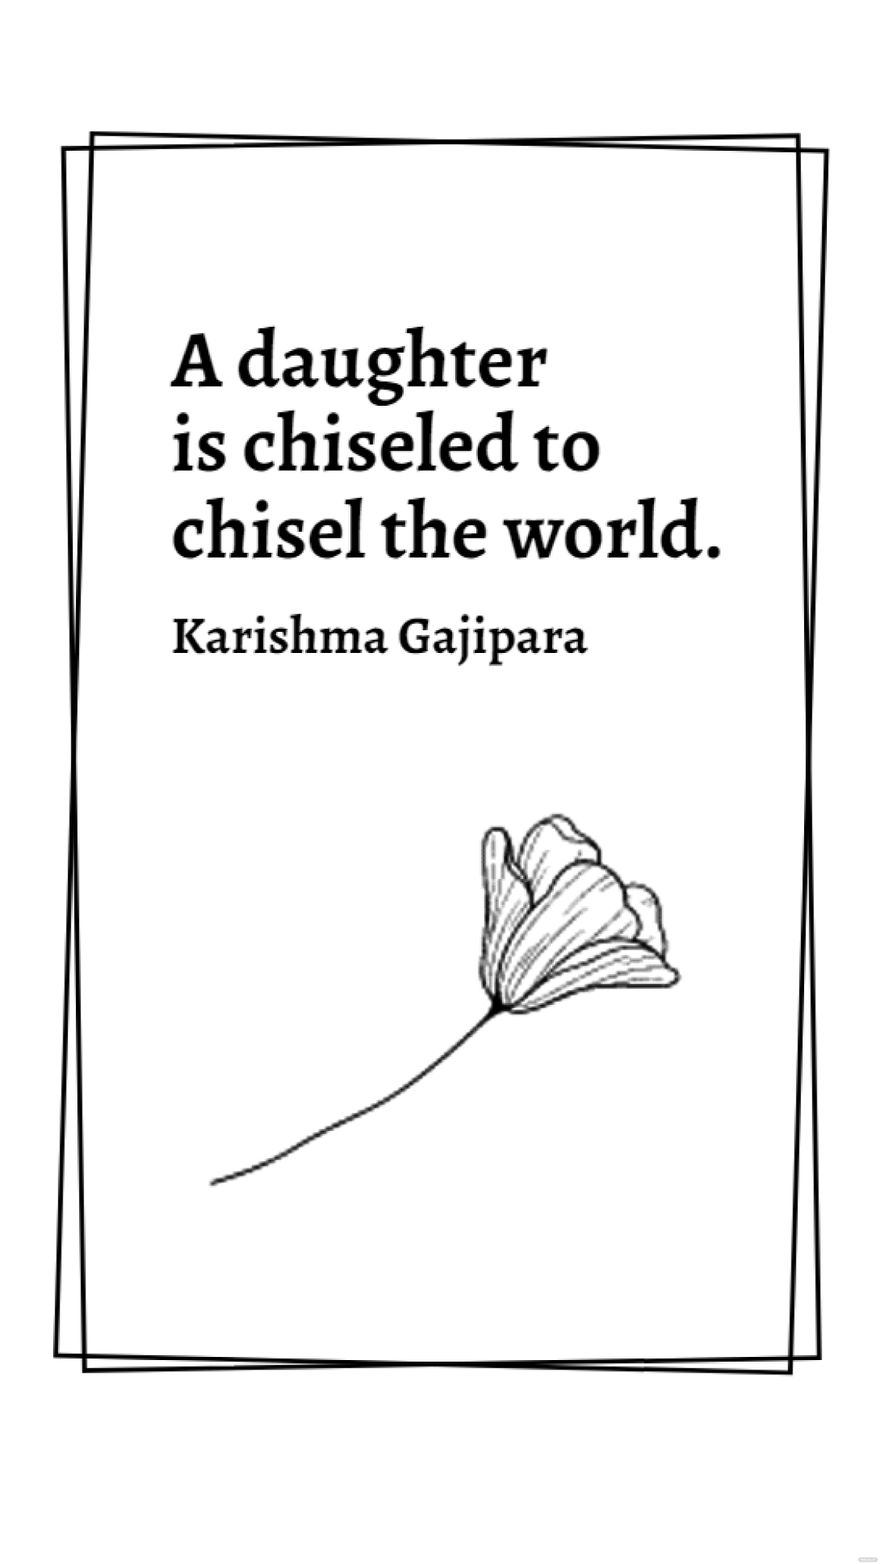 Karishma Gajipara - A daughter is chiseled to chisel the world.